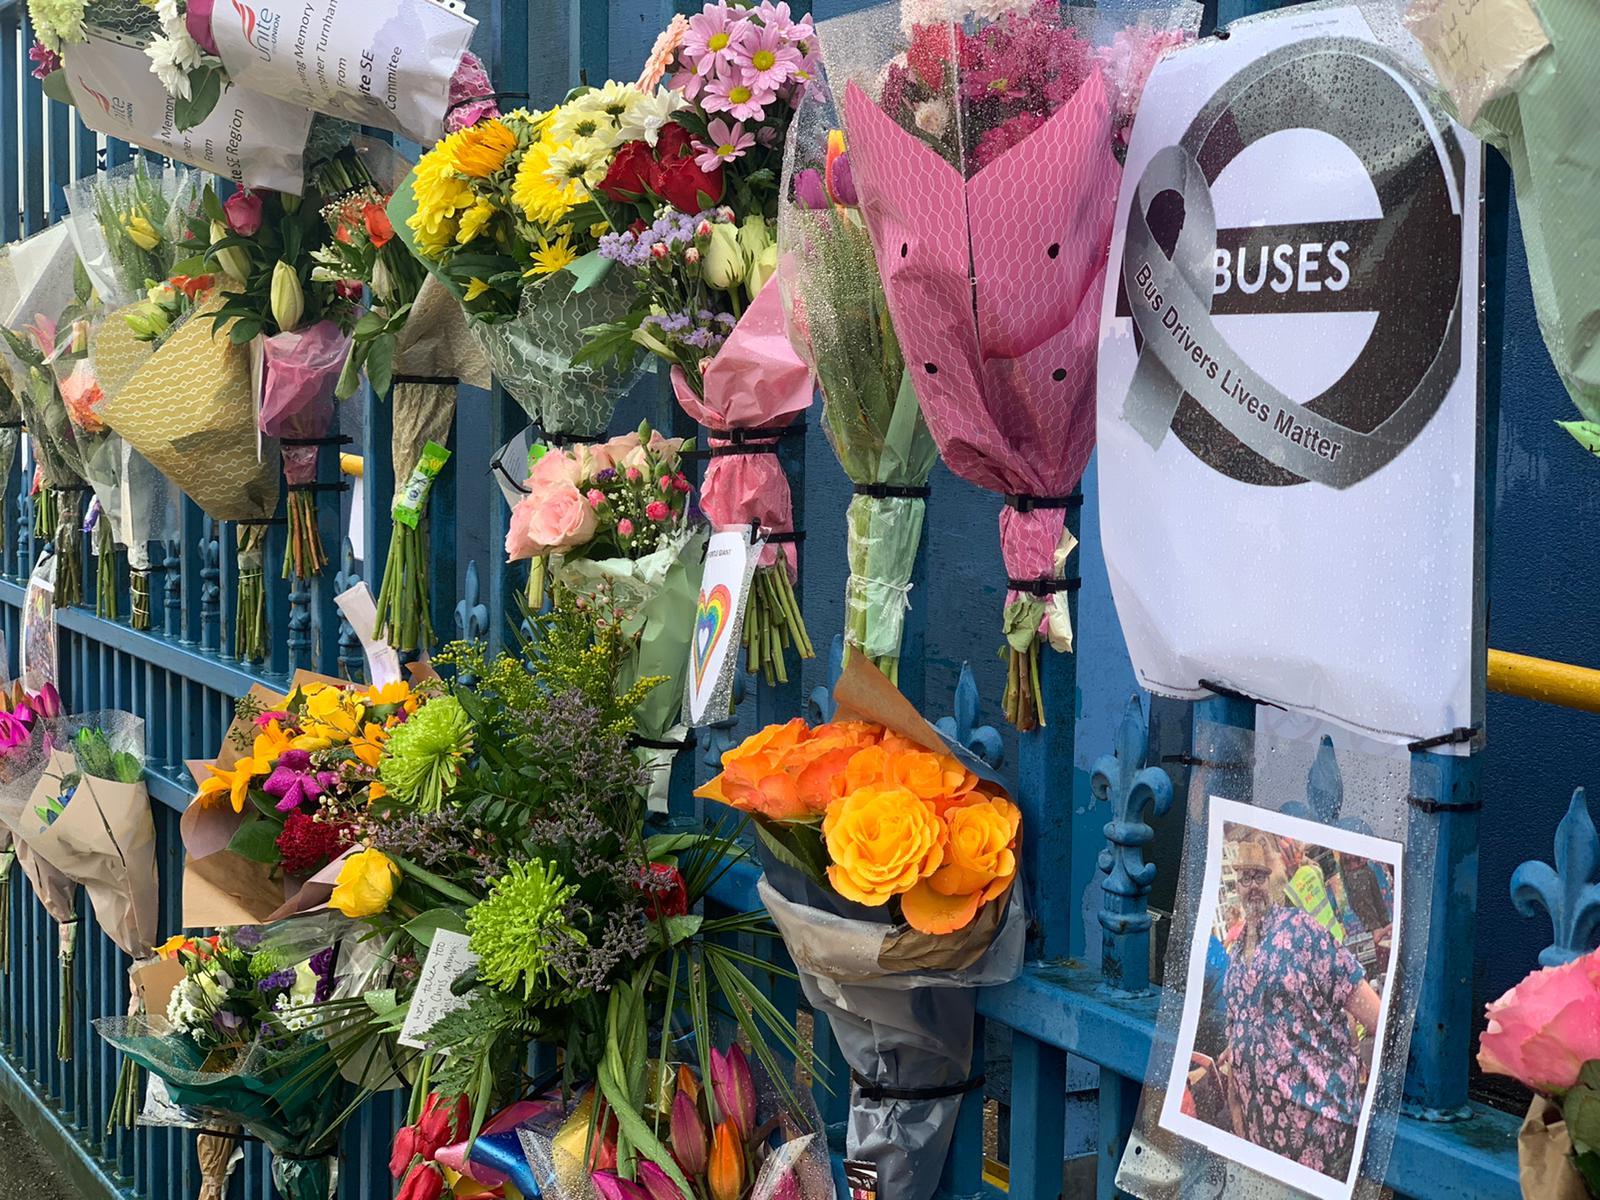 The much loved Brighton and Hove Buses driver, Christopher Turnham, died after falling ill with coronavirus